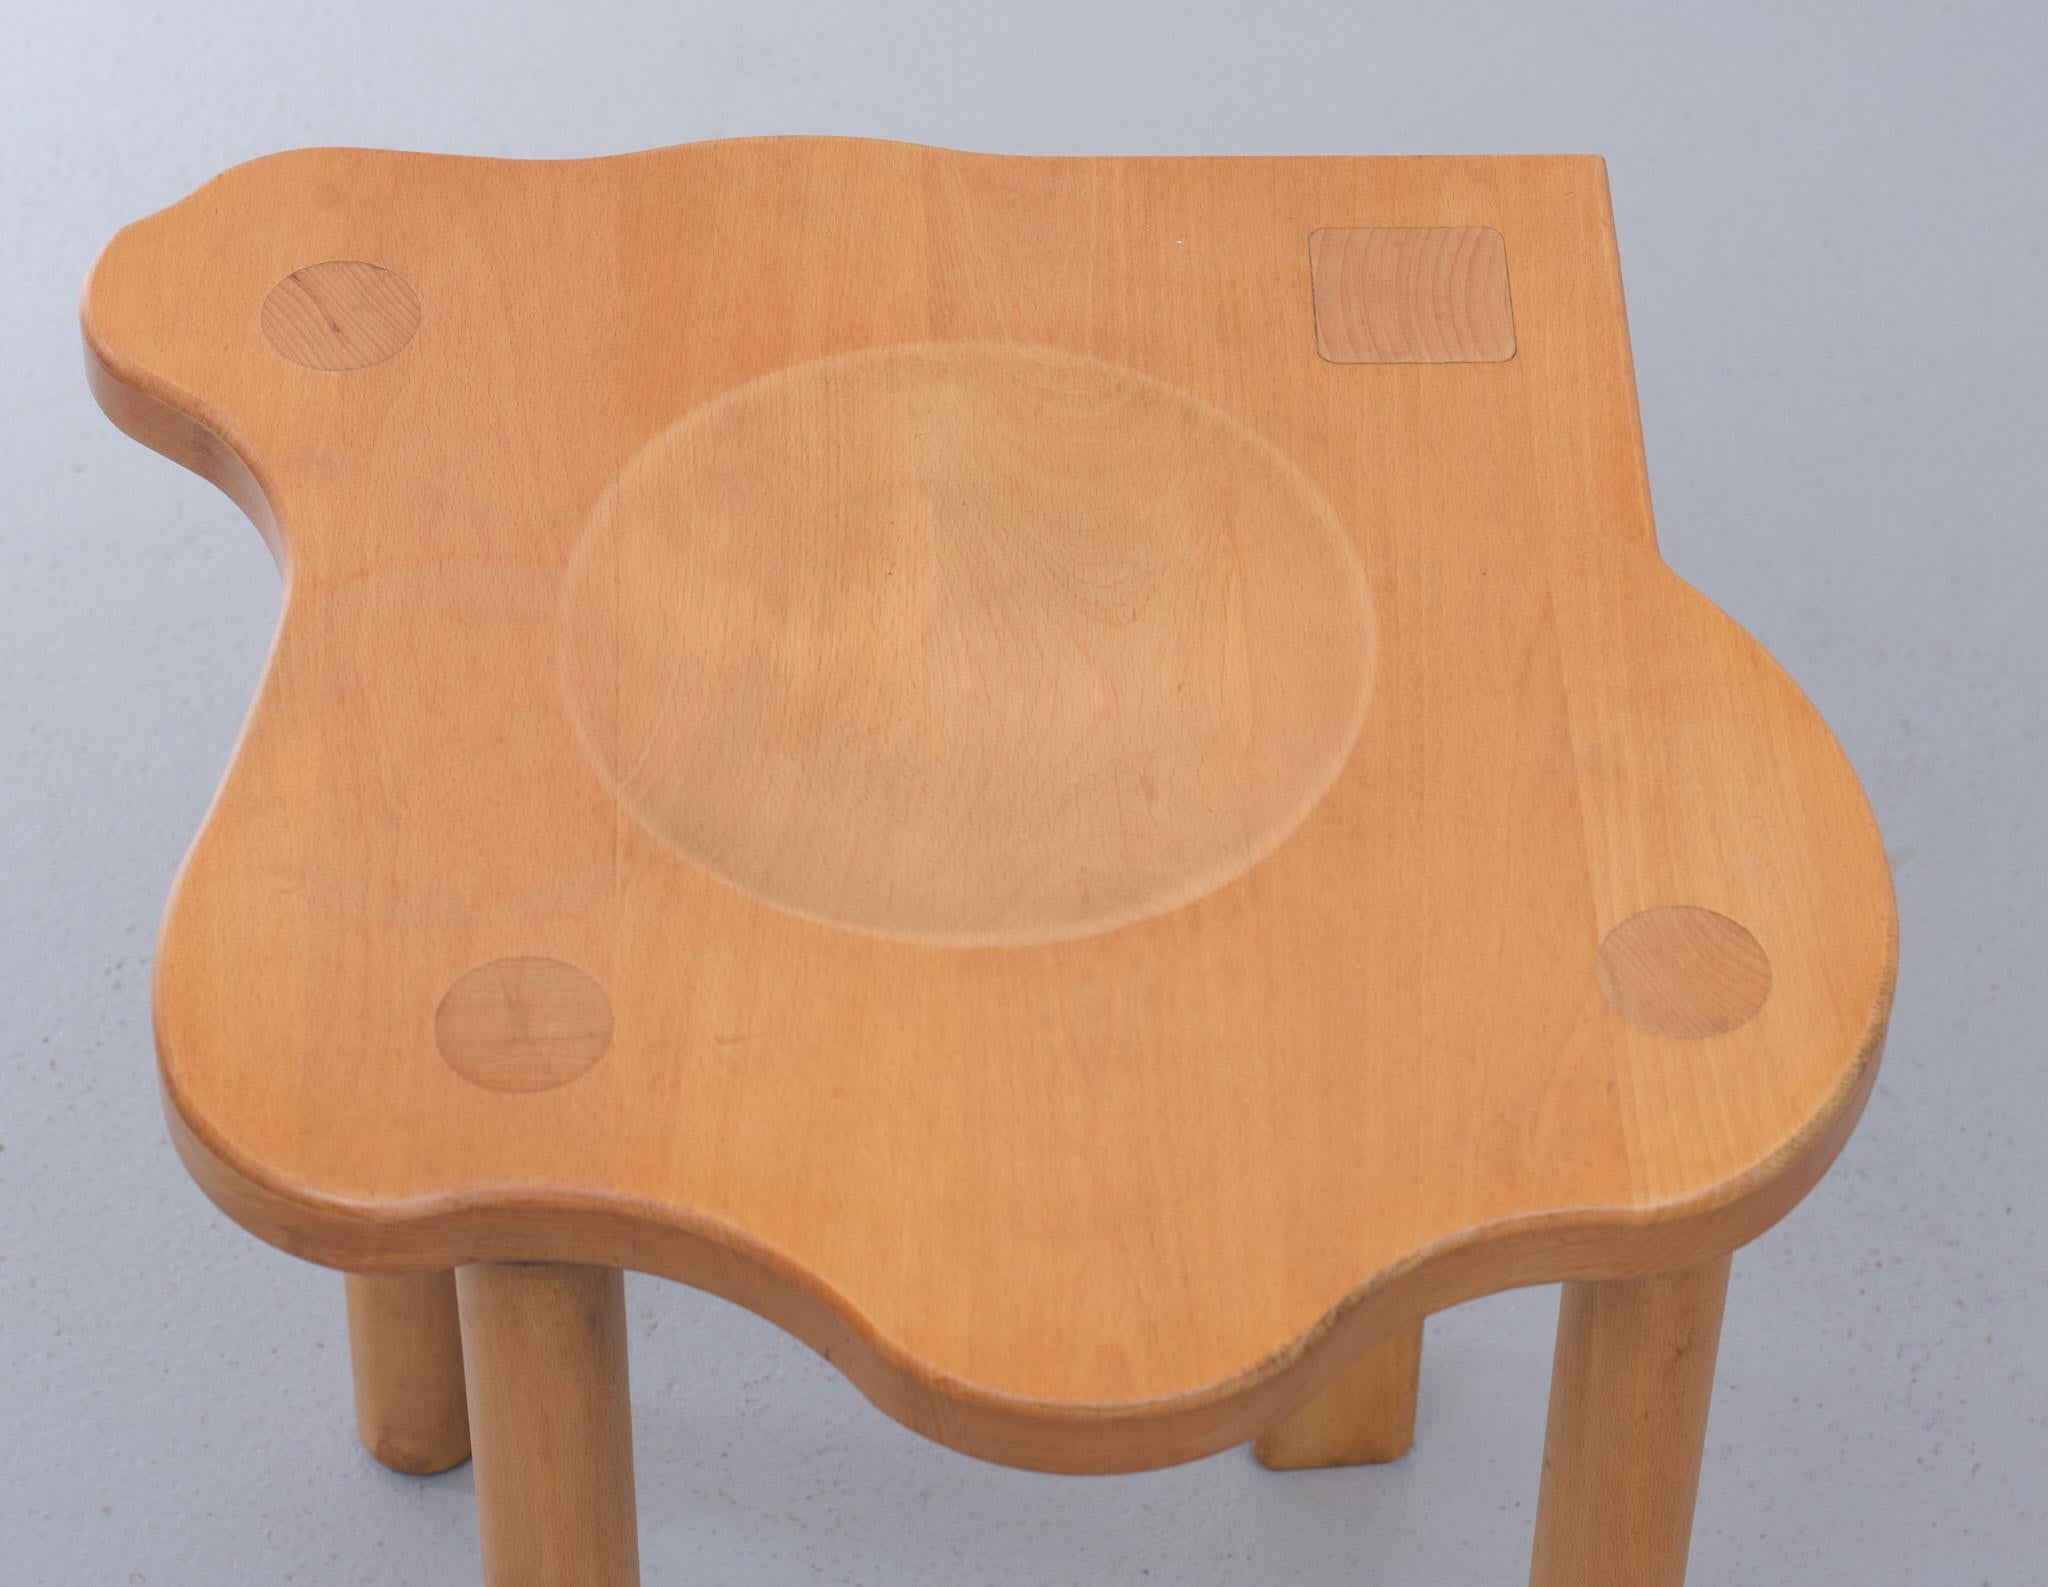 Post-Modern Era Herbstb Solid Pine Wood Stool For Sale